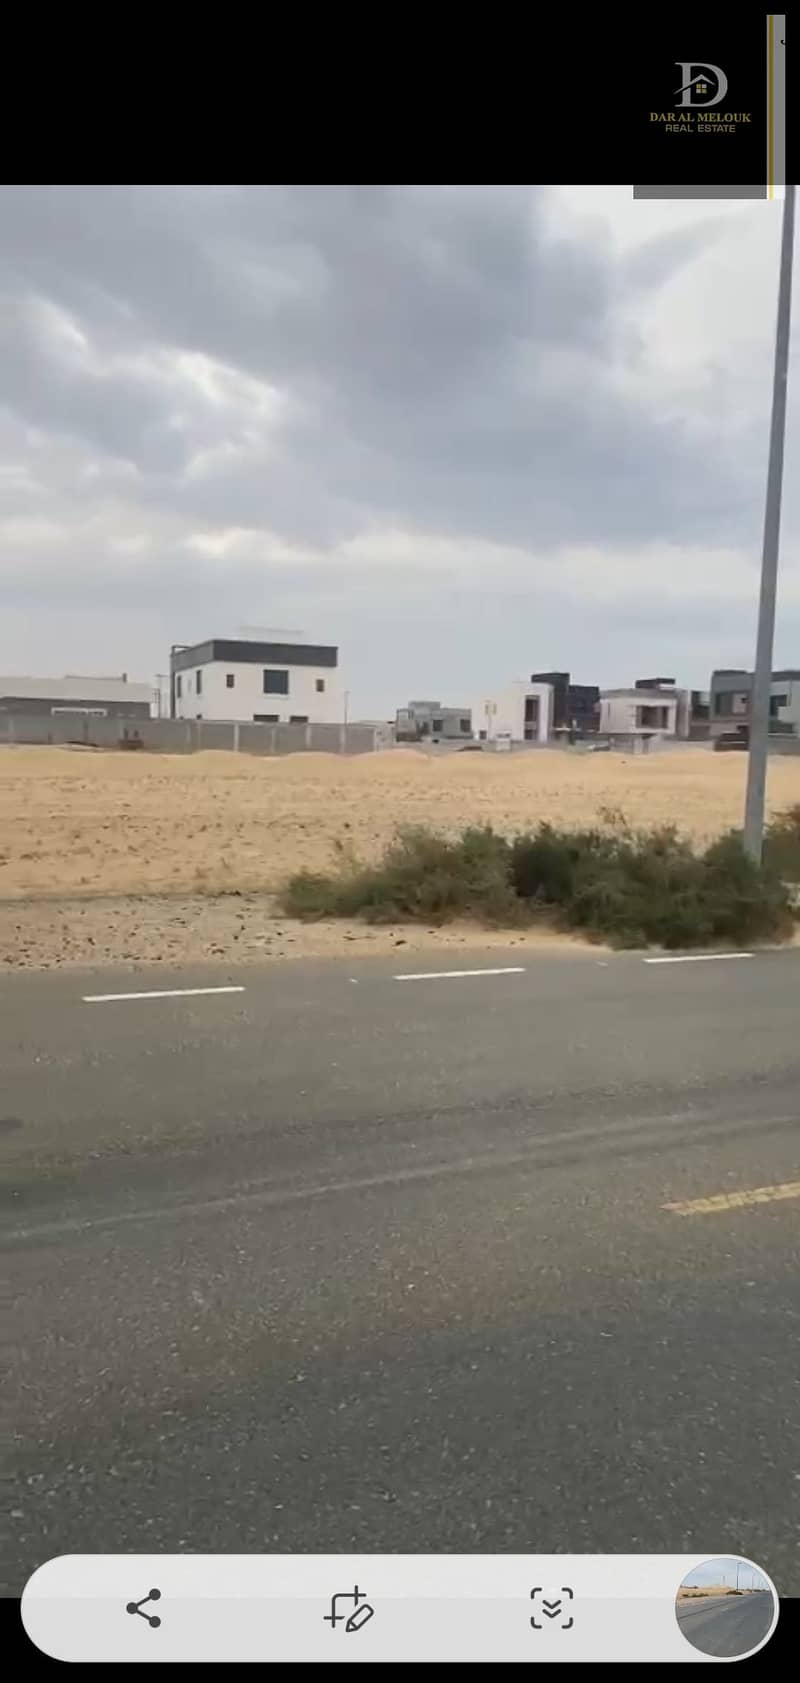 For sale in Sharjah, Al-Hoshi area, residential and investment land, area of ​​9400 feet, a permit for a ground and first villa, stating two adjacent villas, a distinctive location towards Al-Nouf, on a front and back street, close to the Bar Al-Walidin M